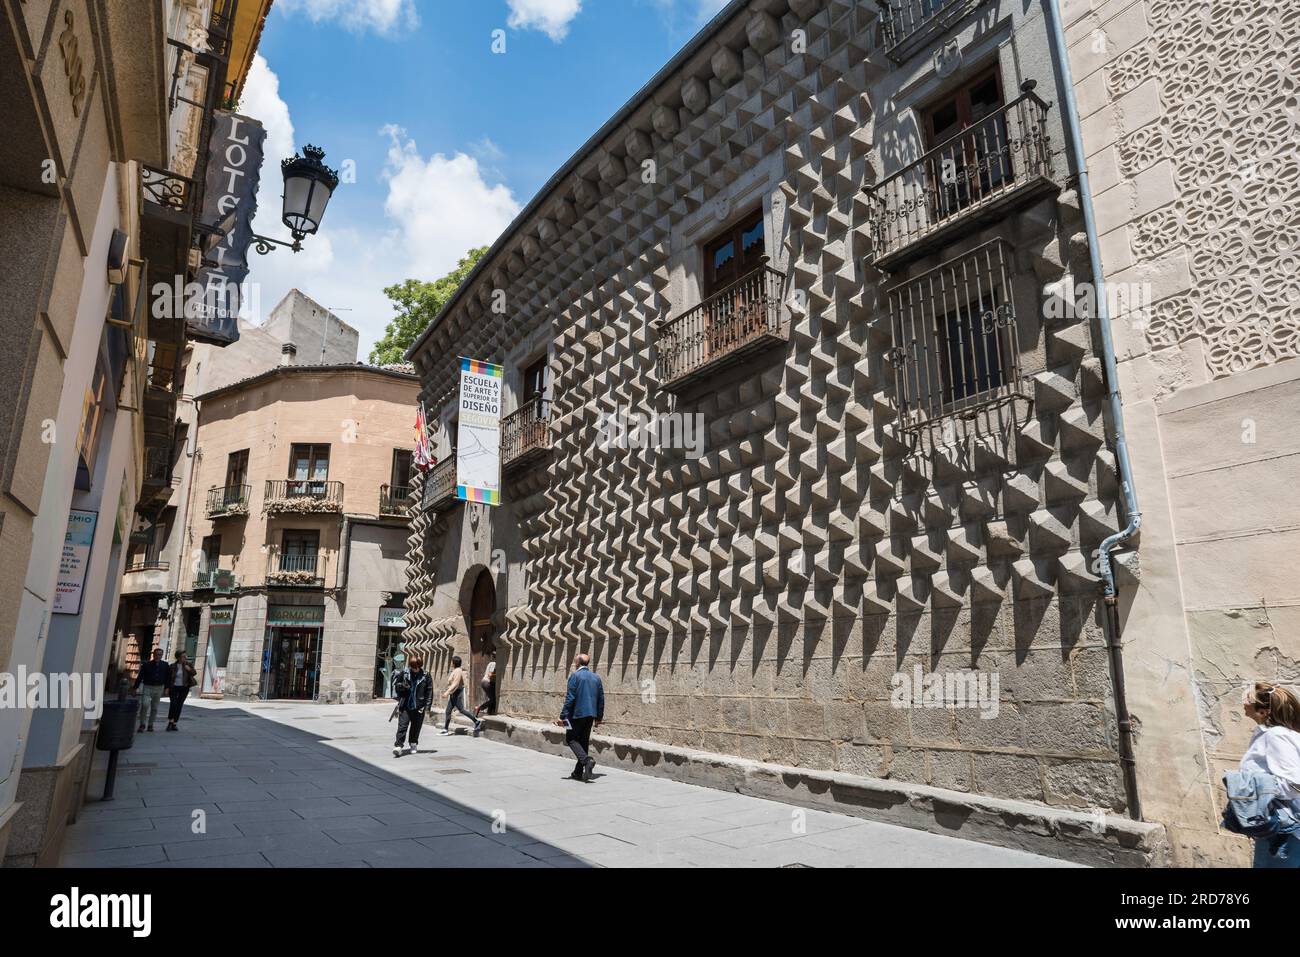 Casa de los PIcos Segovia, view of the 15th Century mansion known as the House of Spikes whose exterior is decorated with pyramid-shaped stones, Spain Stock Photo